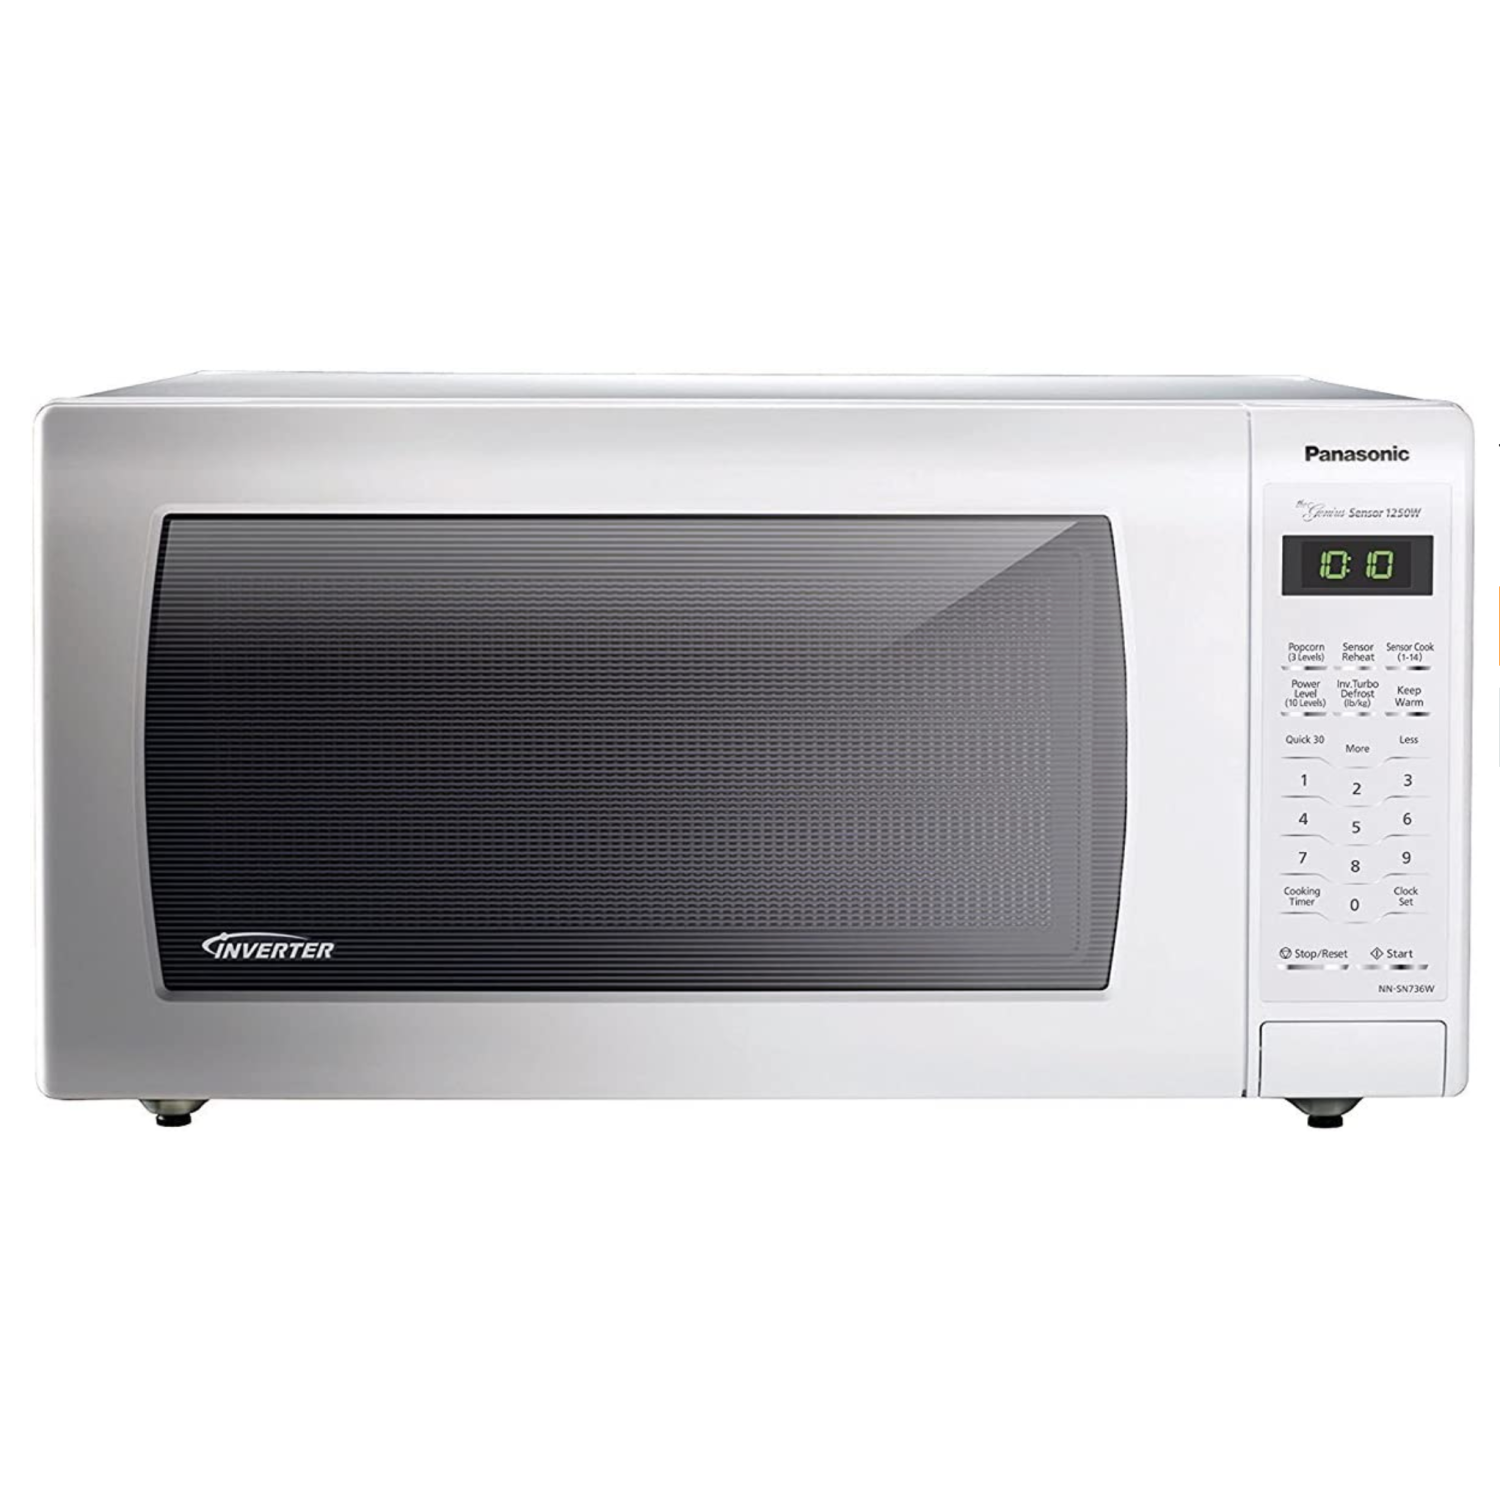 Panasonic 1.6 Cu. ft. Countertop Microwave Oven with Inverter Technology (NN-SN736W) - White